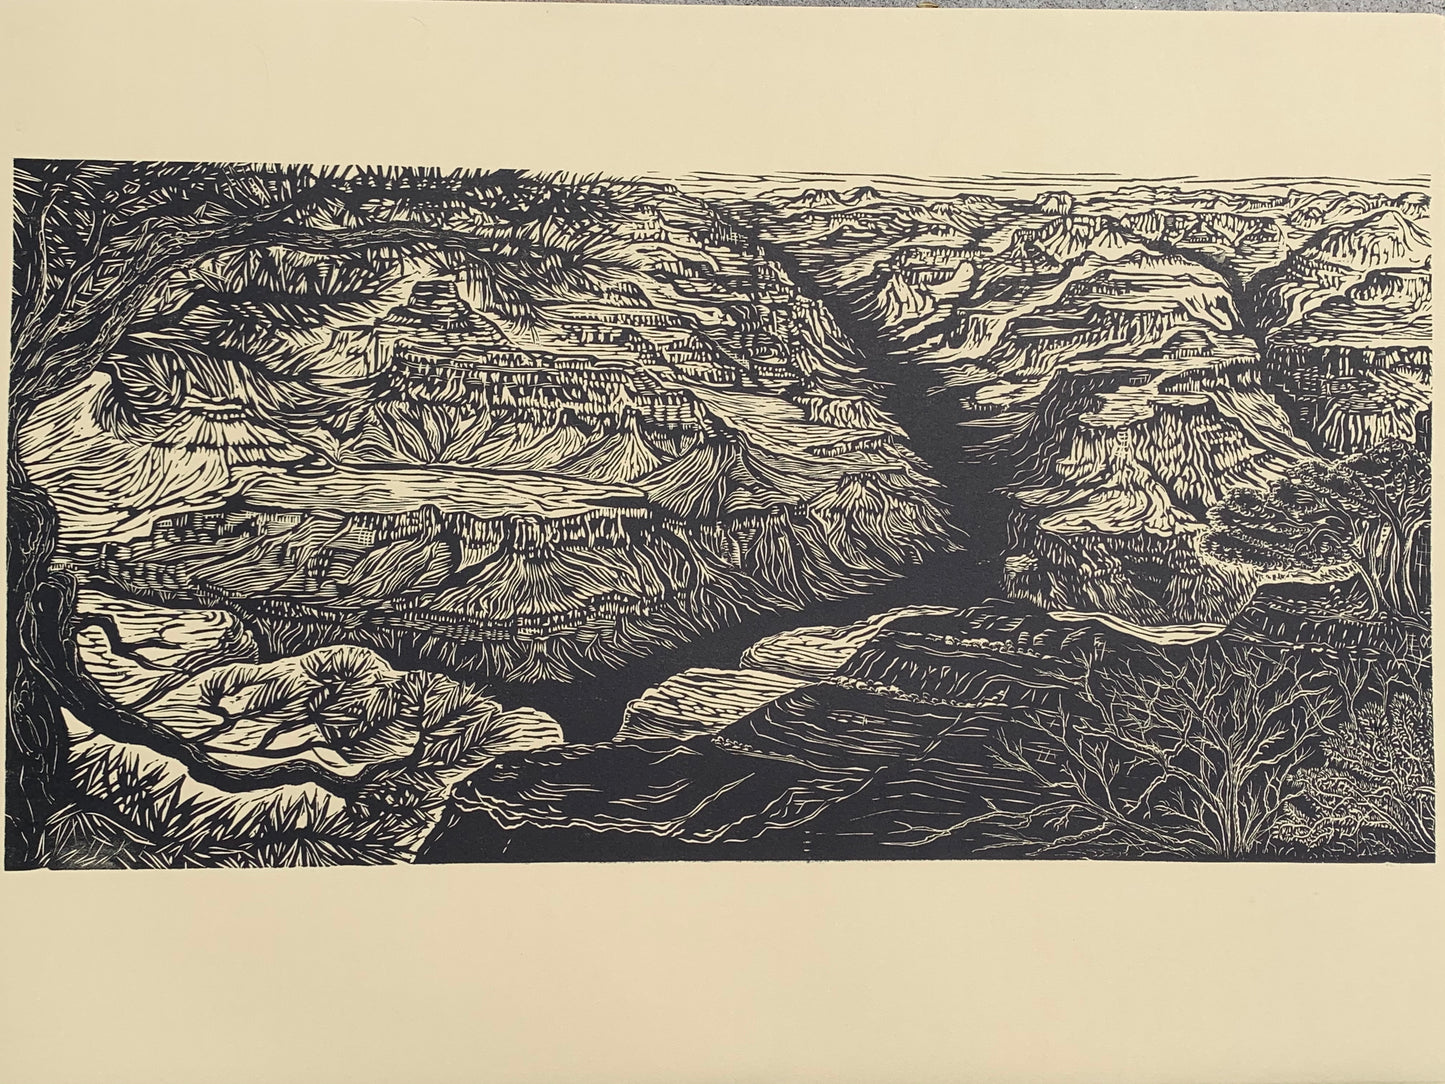 Matched Set of 3 Southwest Woodcuts Magnificent Landscape Views of Grand Canyon